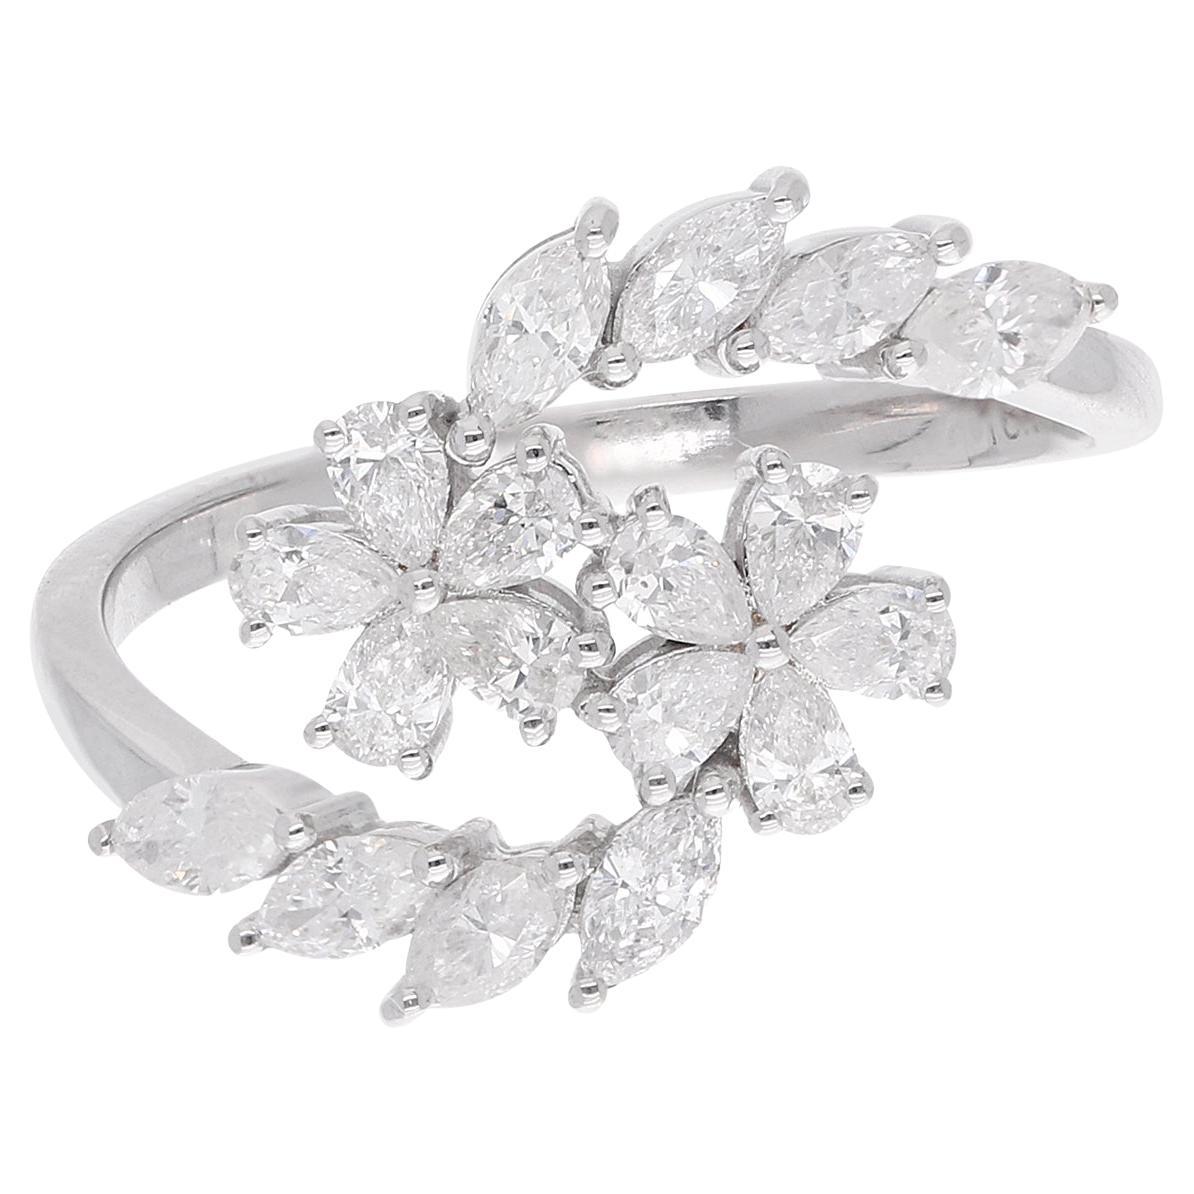 For Sale:  1 Carat Pear & Marquise Diamond Flower Ring 18 Karat White Gold Fine Jewelry